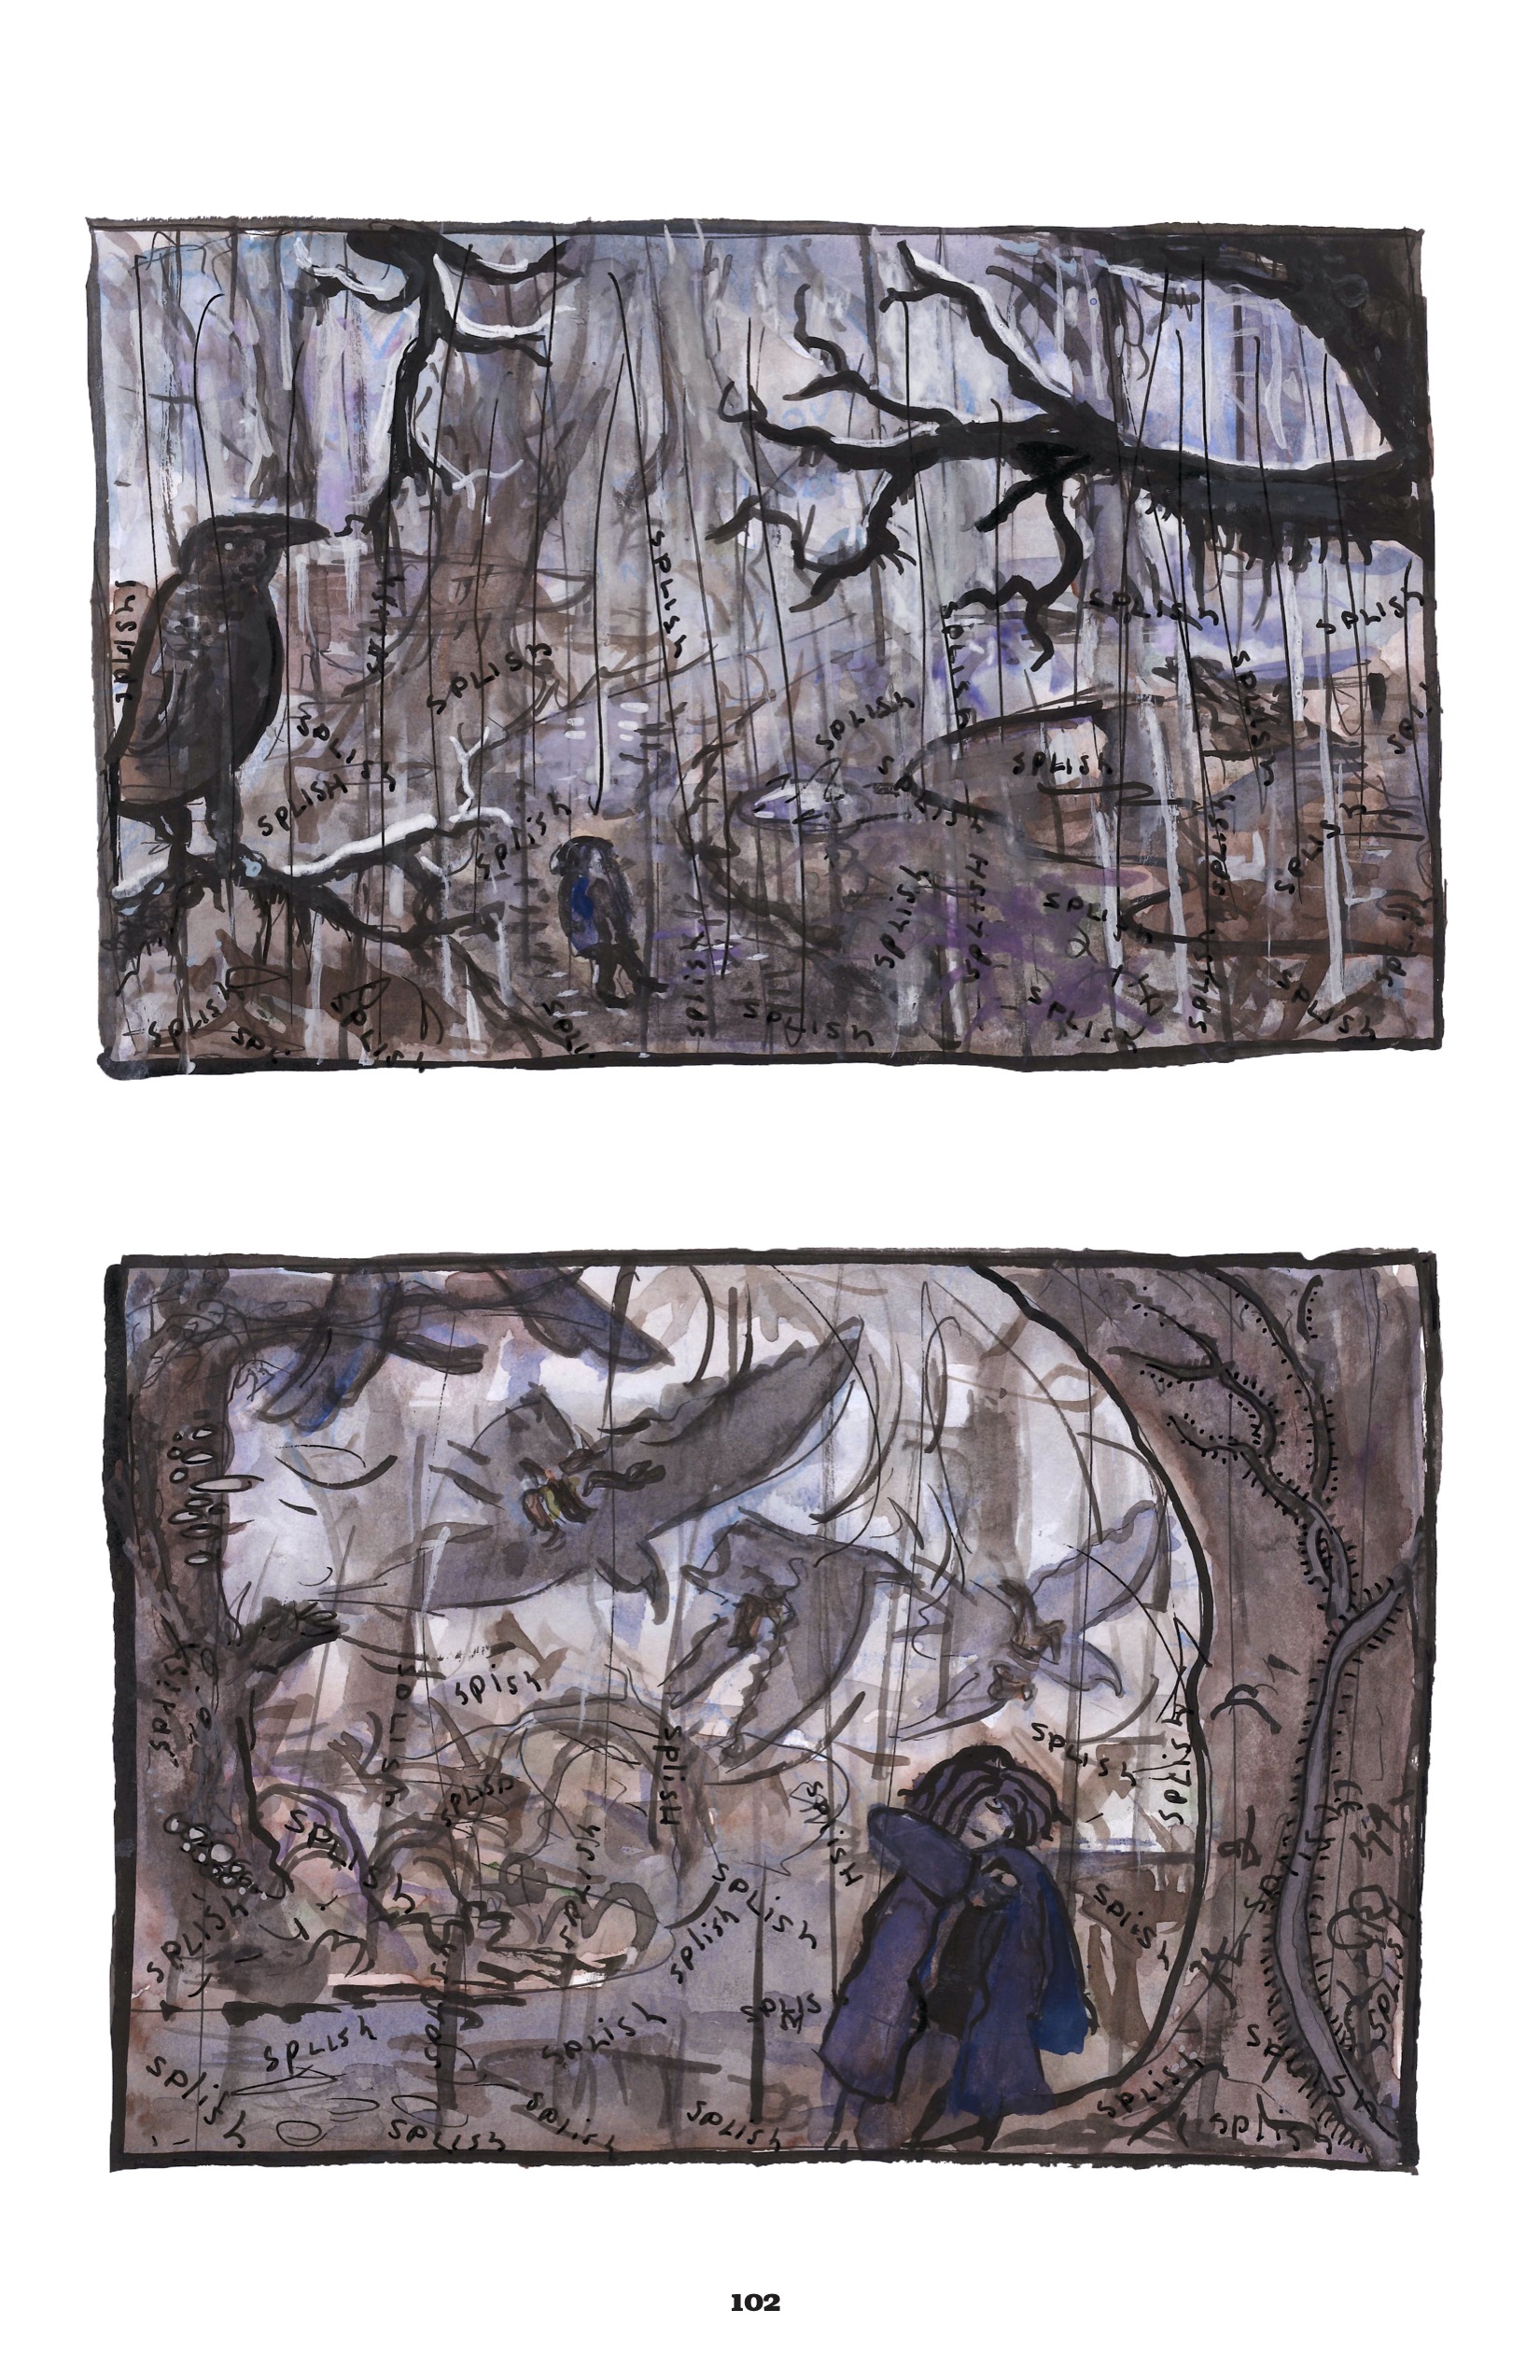 The page is divided horizontally into two panels with a large gutter between them.

1. A scene of the woods. A crow is perched on a branch in the foreground. Other branches frame the landscape, a wooded path covered with puddles from the ongoing rain. Onomatopoeias are camouflaged in the landscape: â€œSplish splish splish splish splishâ€
2. A human figure is now walking through the woods, wearing a purple hooded raincoat. They have shoulder length slightly wavy brown hair. They are framed by two trees on either side, and in the background are multiple shots of the same bird flying across the panel. The splishes continue dotting the scene.